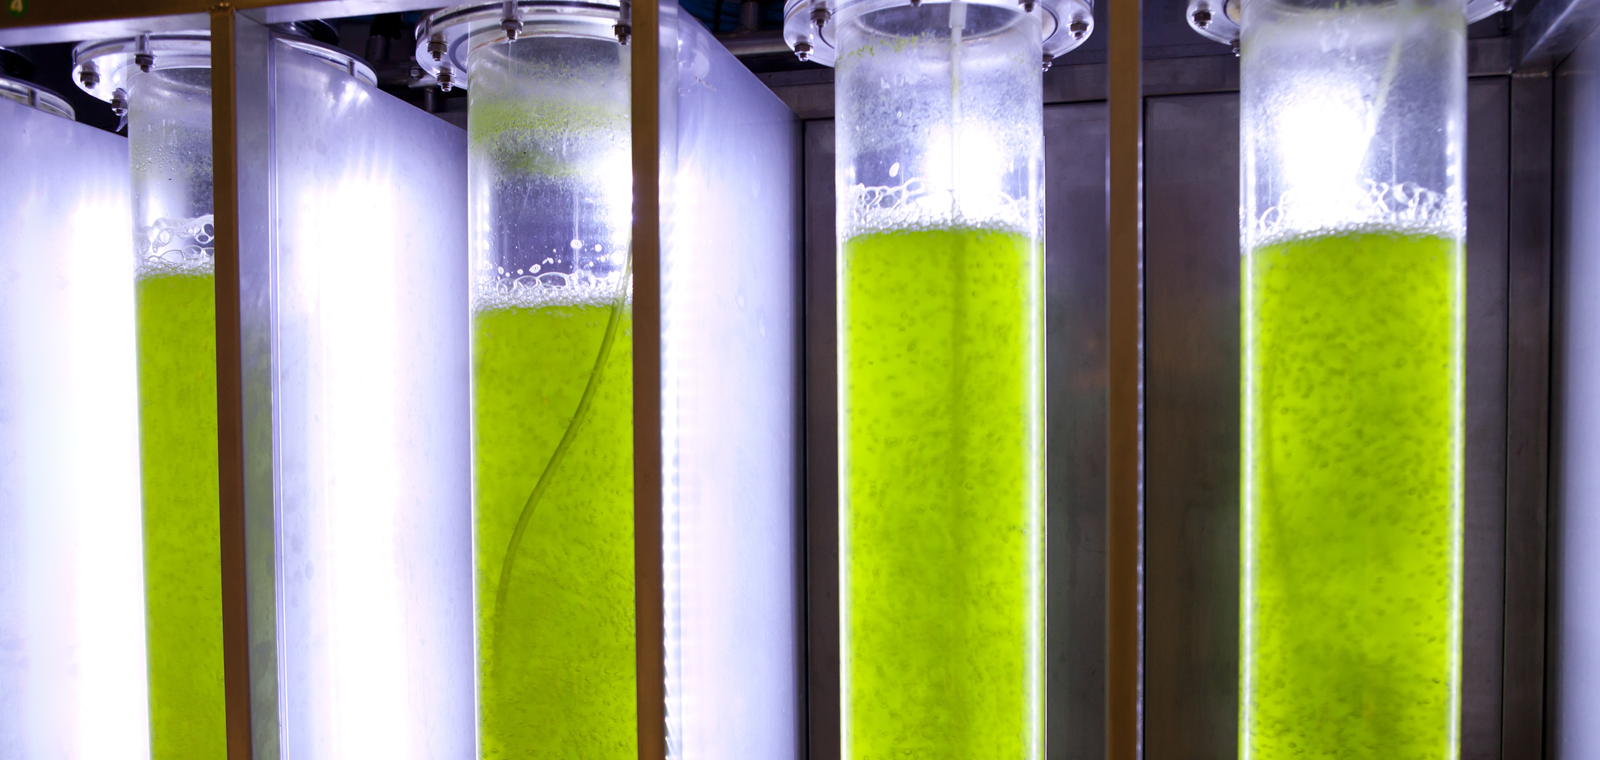 Four large, vertical photobioreactor tubes are filled with a bright green bubbling liquid. 